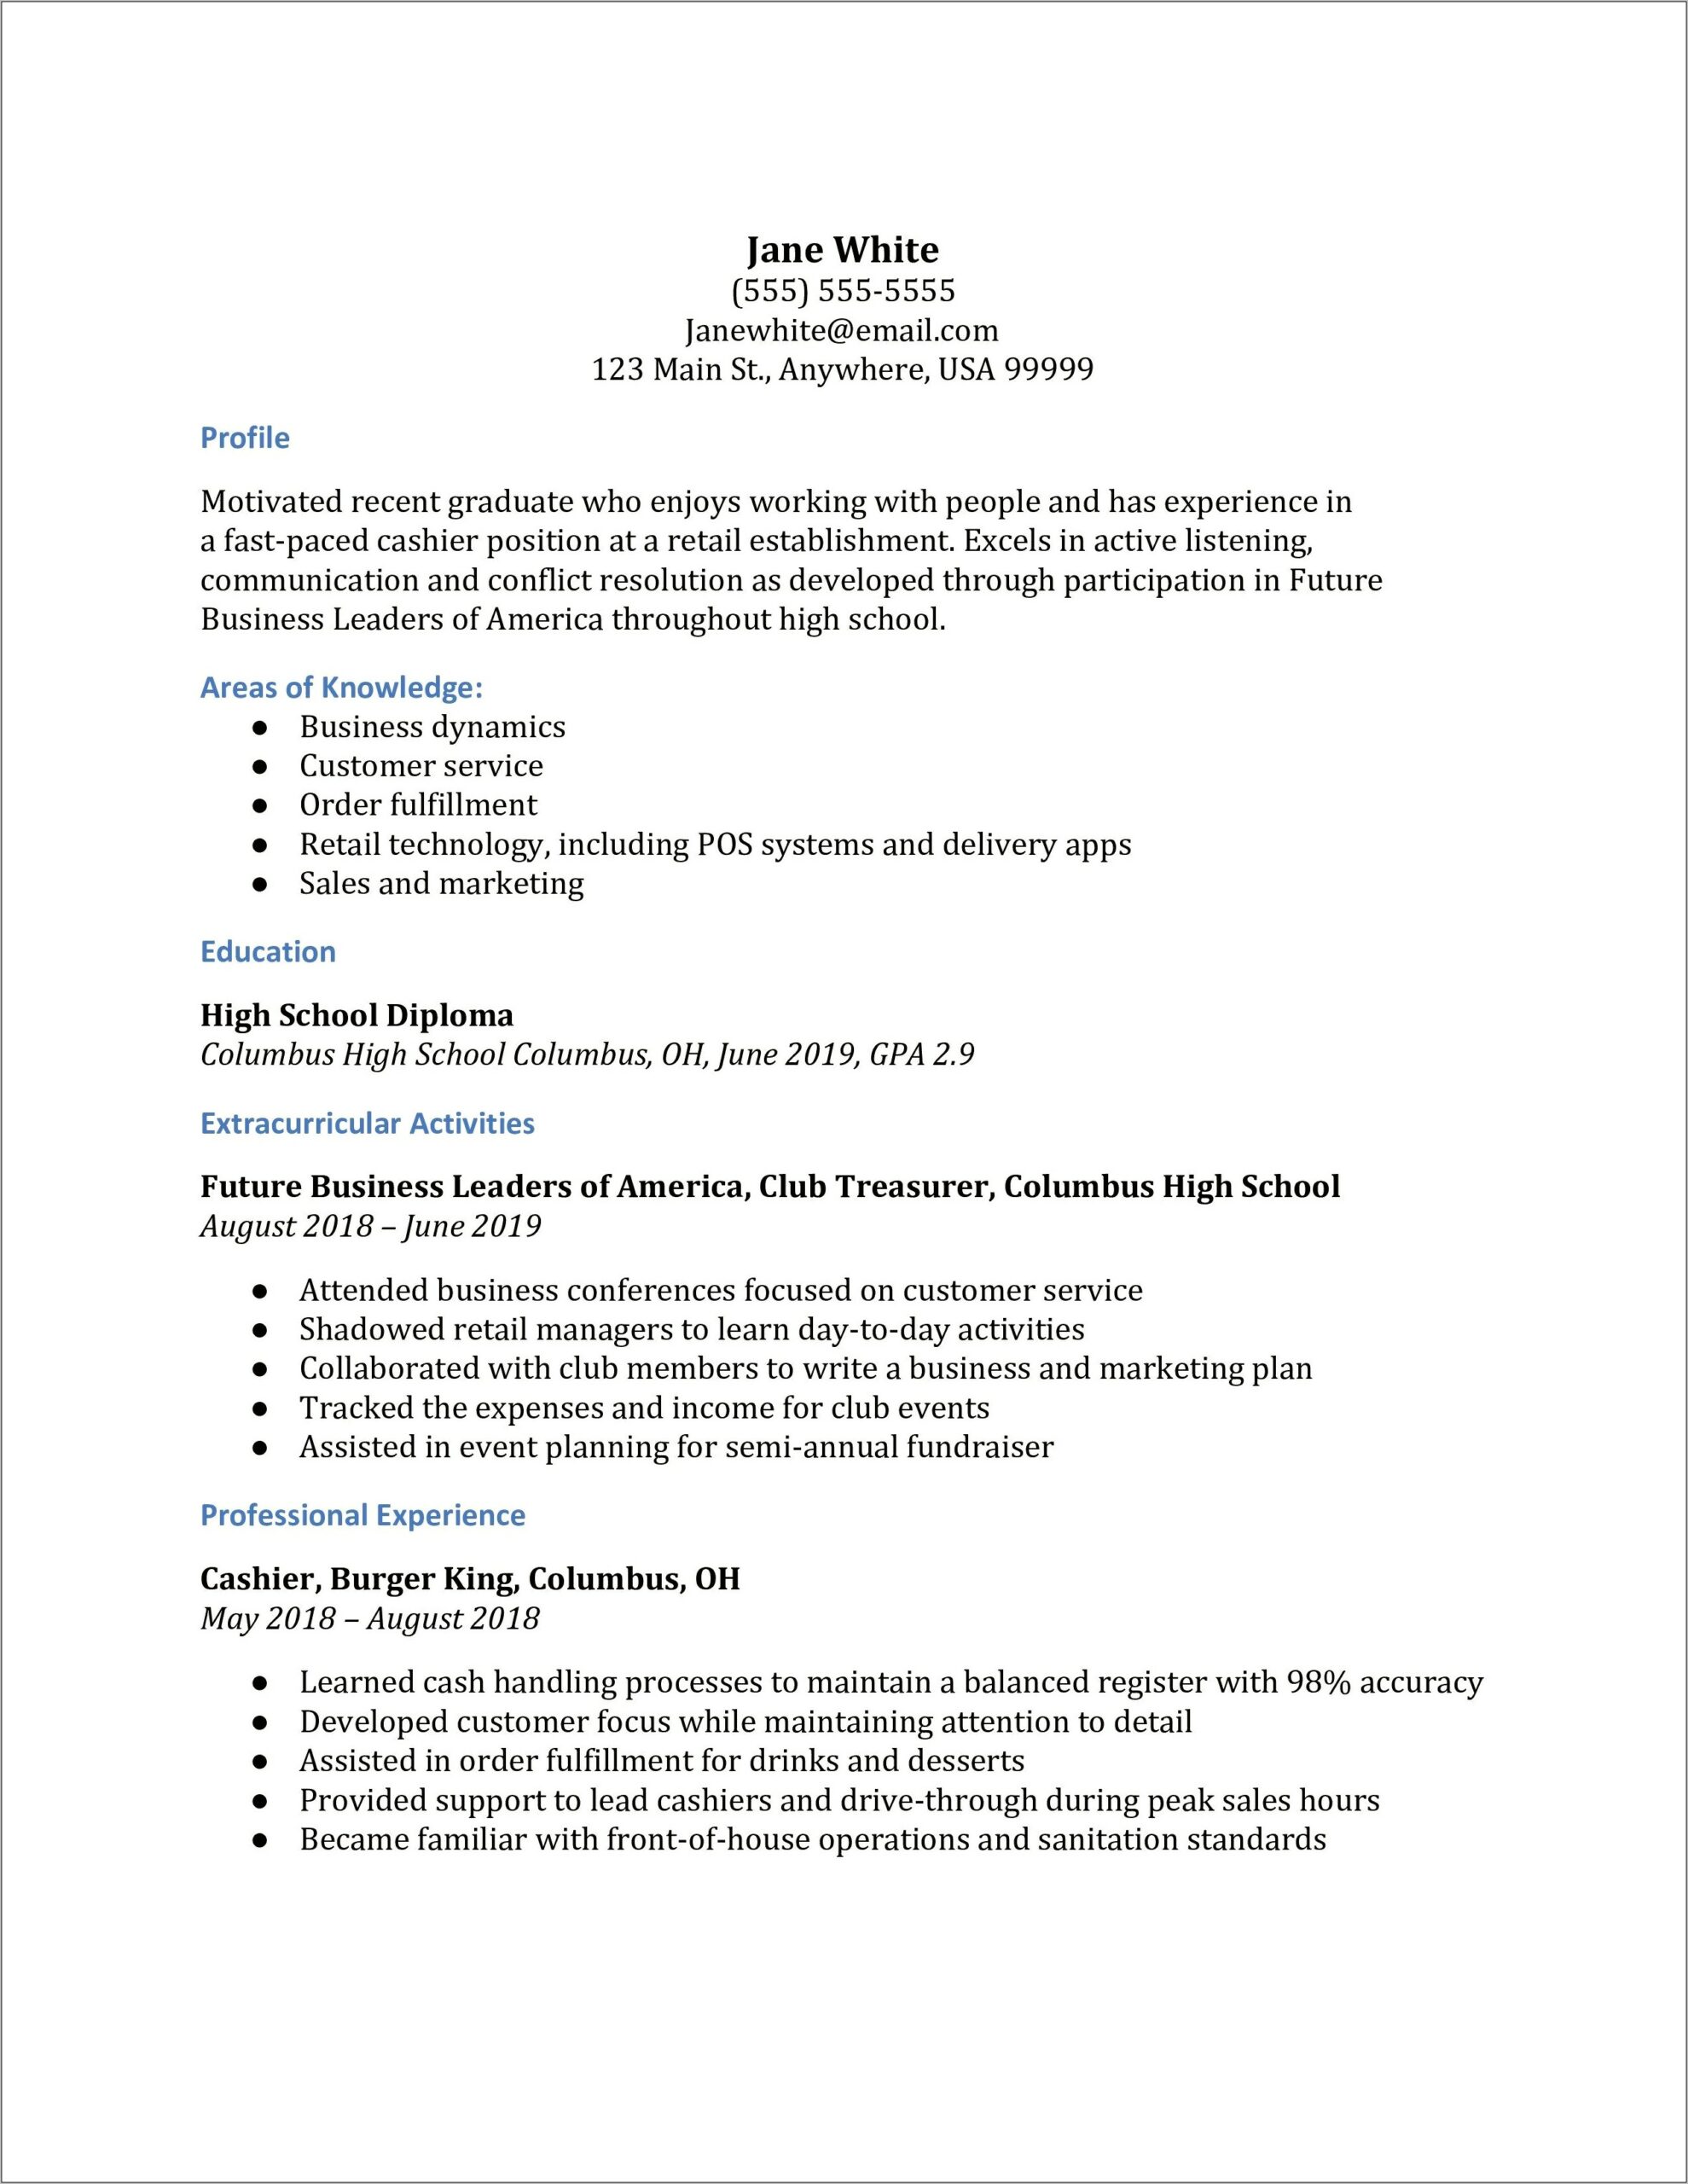 Resume For Cashier Position With No Experience